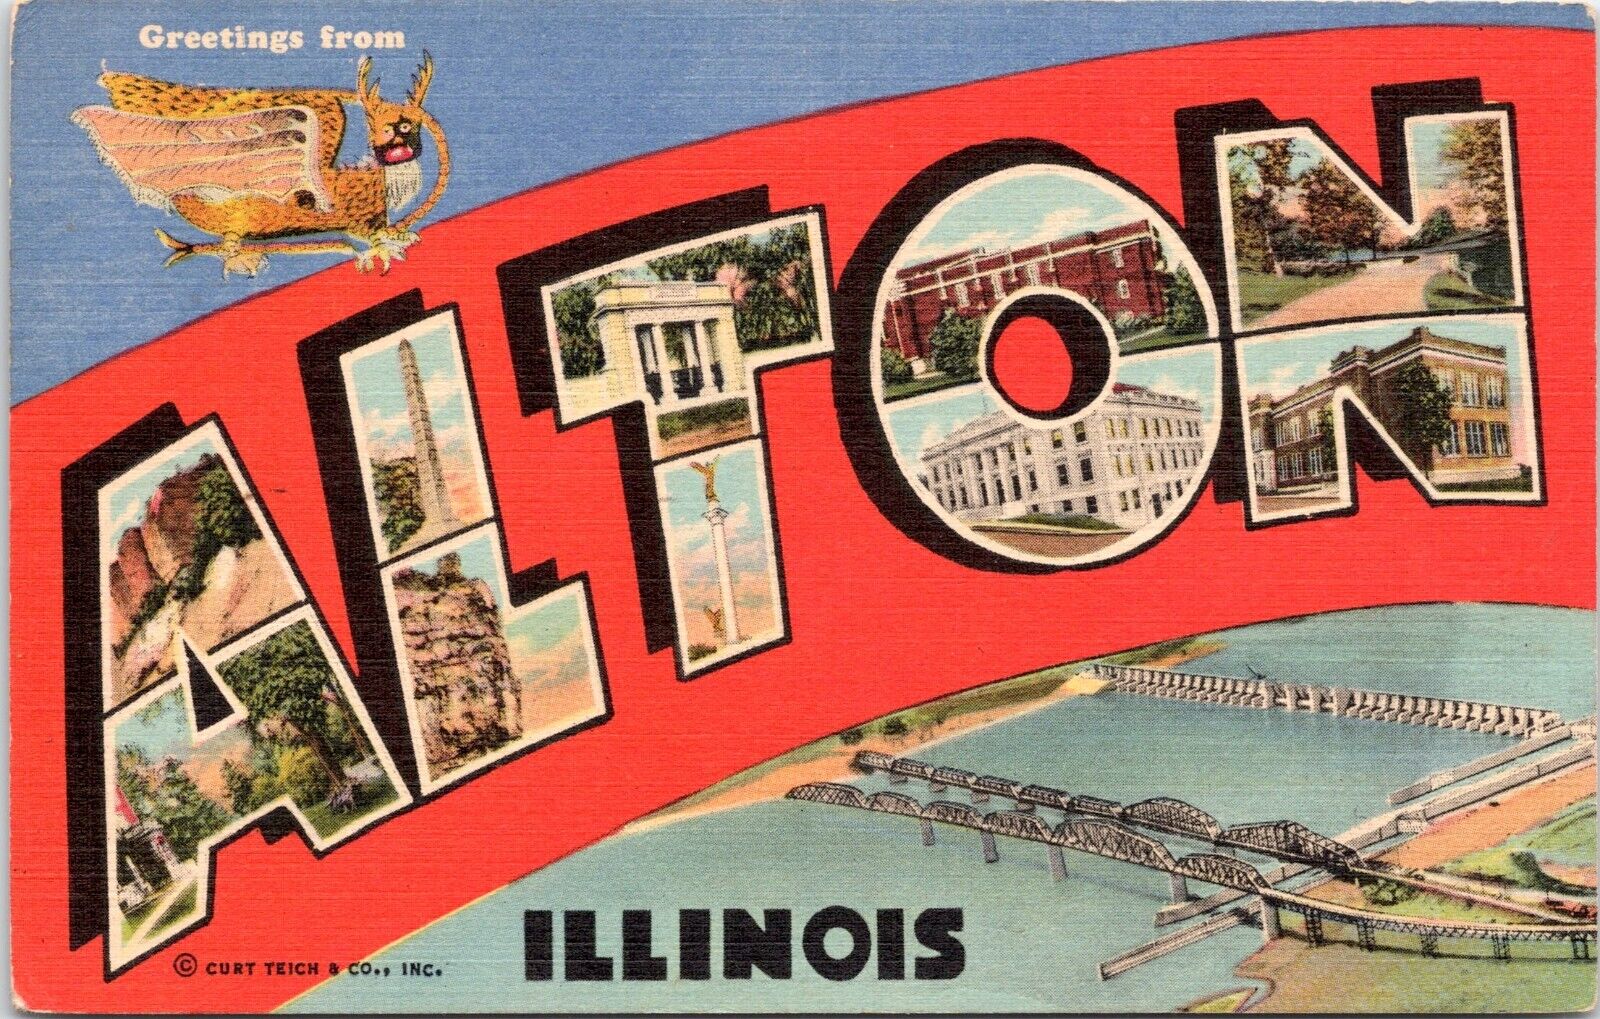 Large Letter Greetings from Alton, Illinois - 1945 Linen Postcard Curt Teich